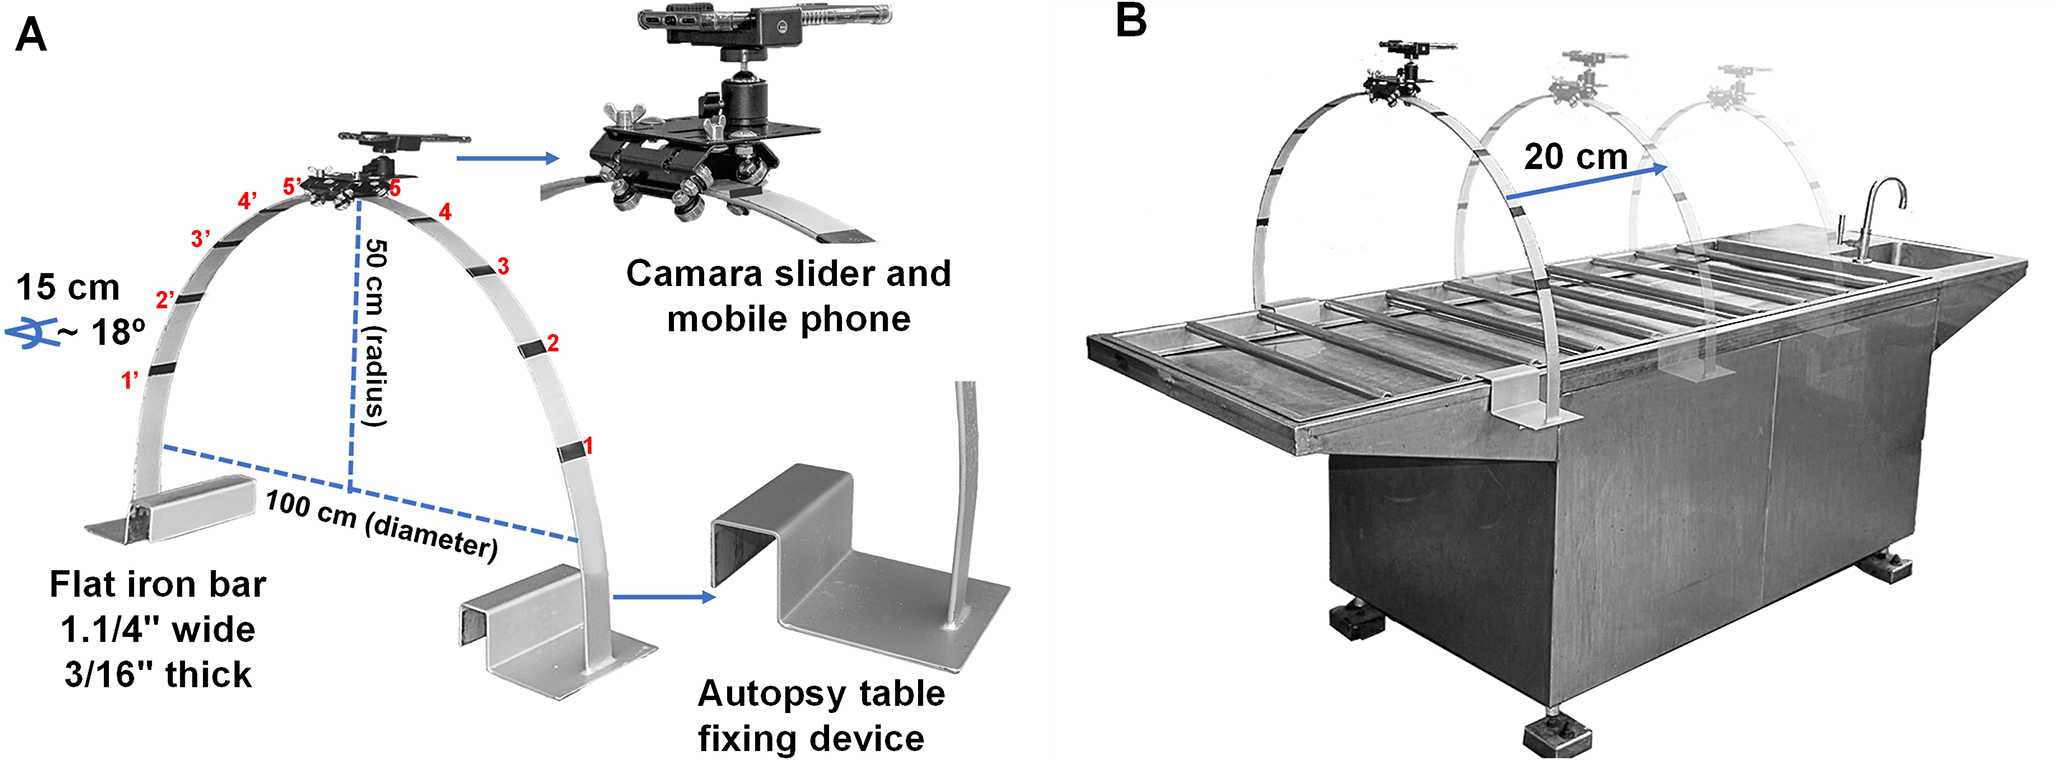 Single-camera photogrammetry using a mobile phone for low-cost documentation of corpses